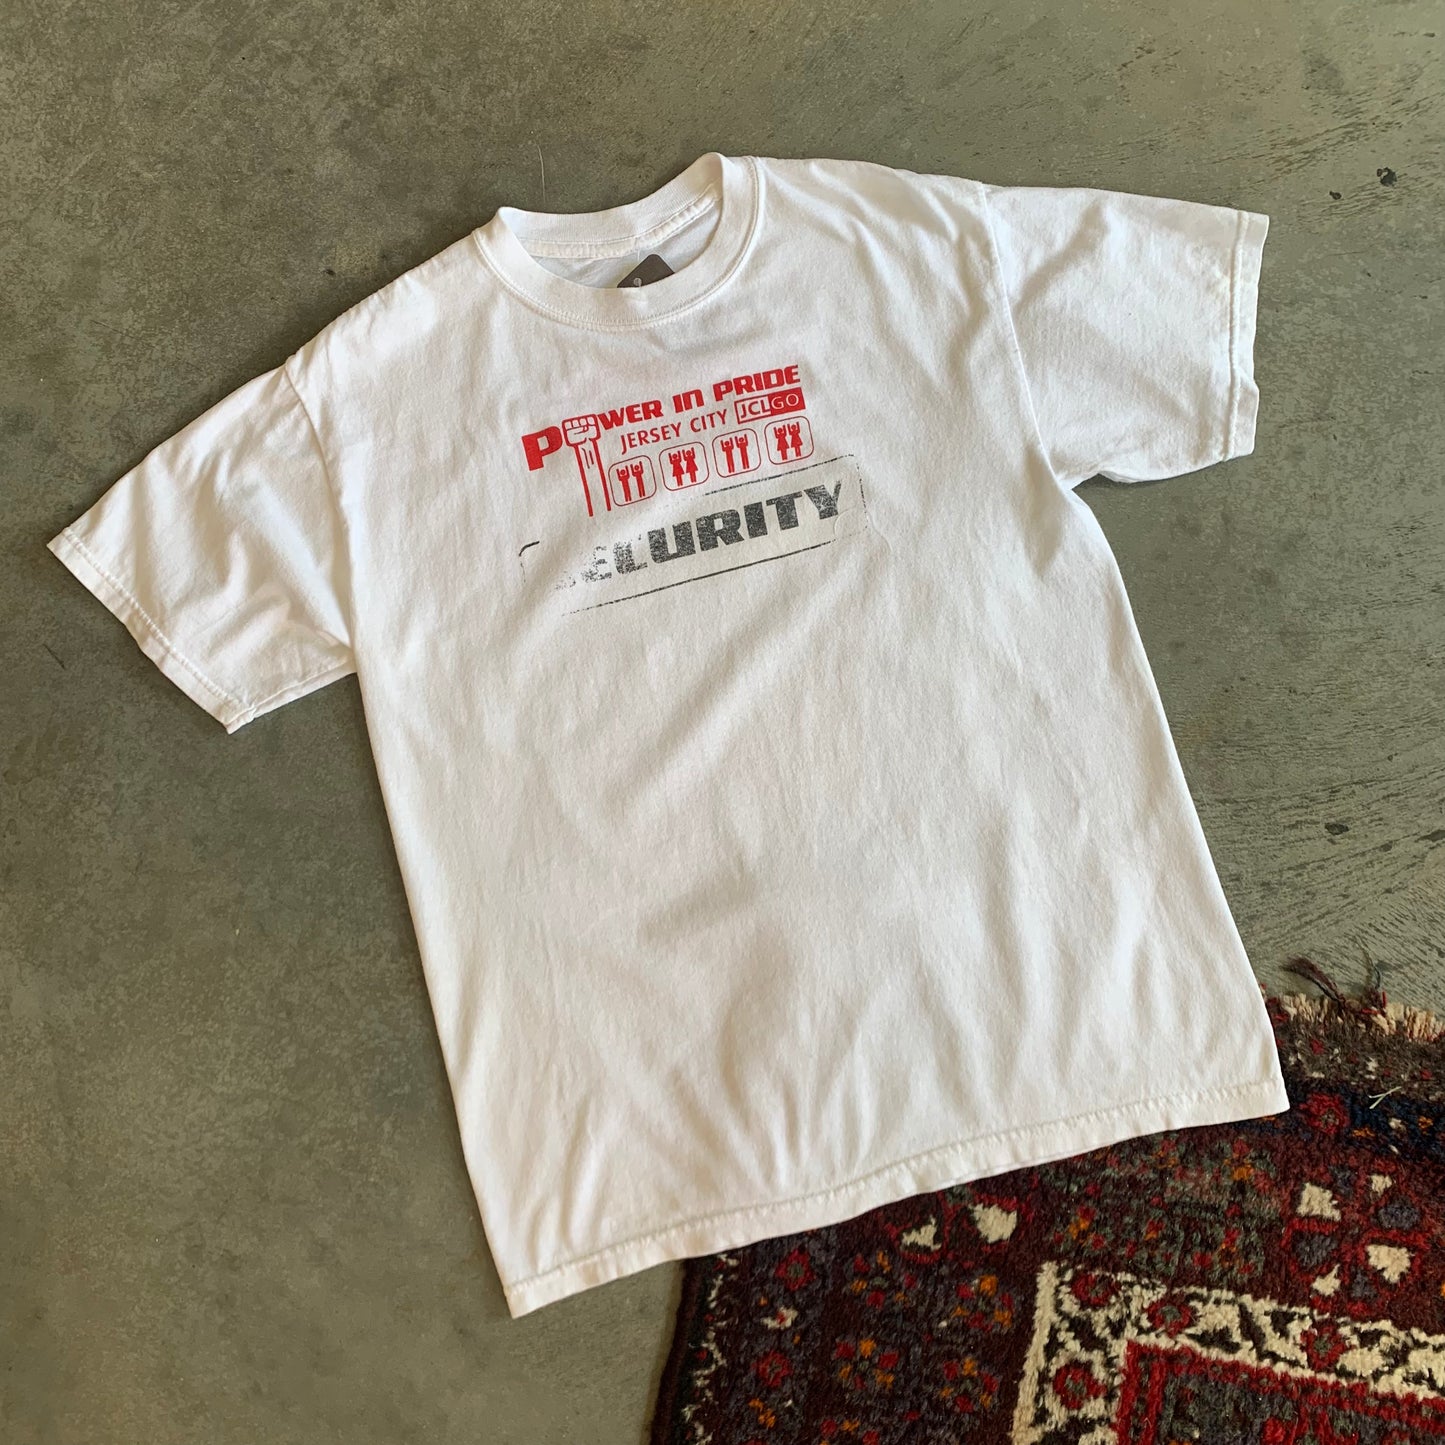 Jersey City Pride Security Shirt - M